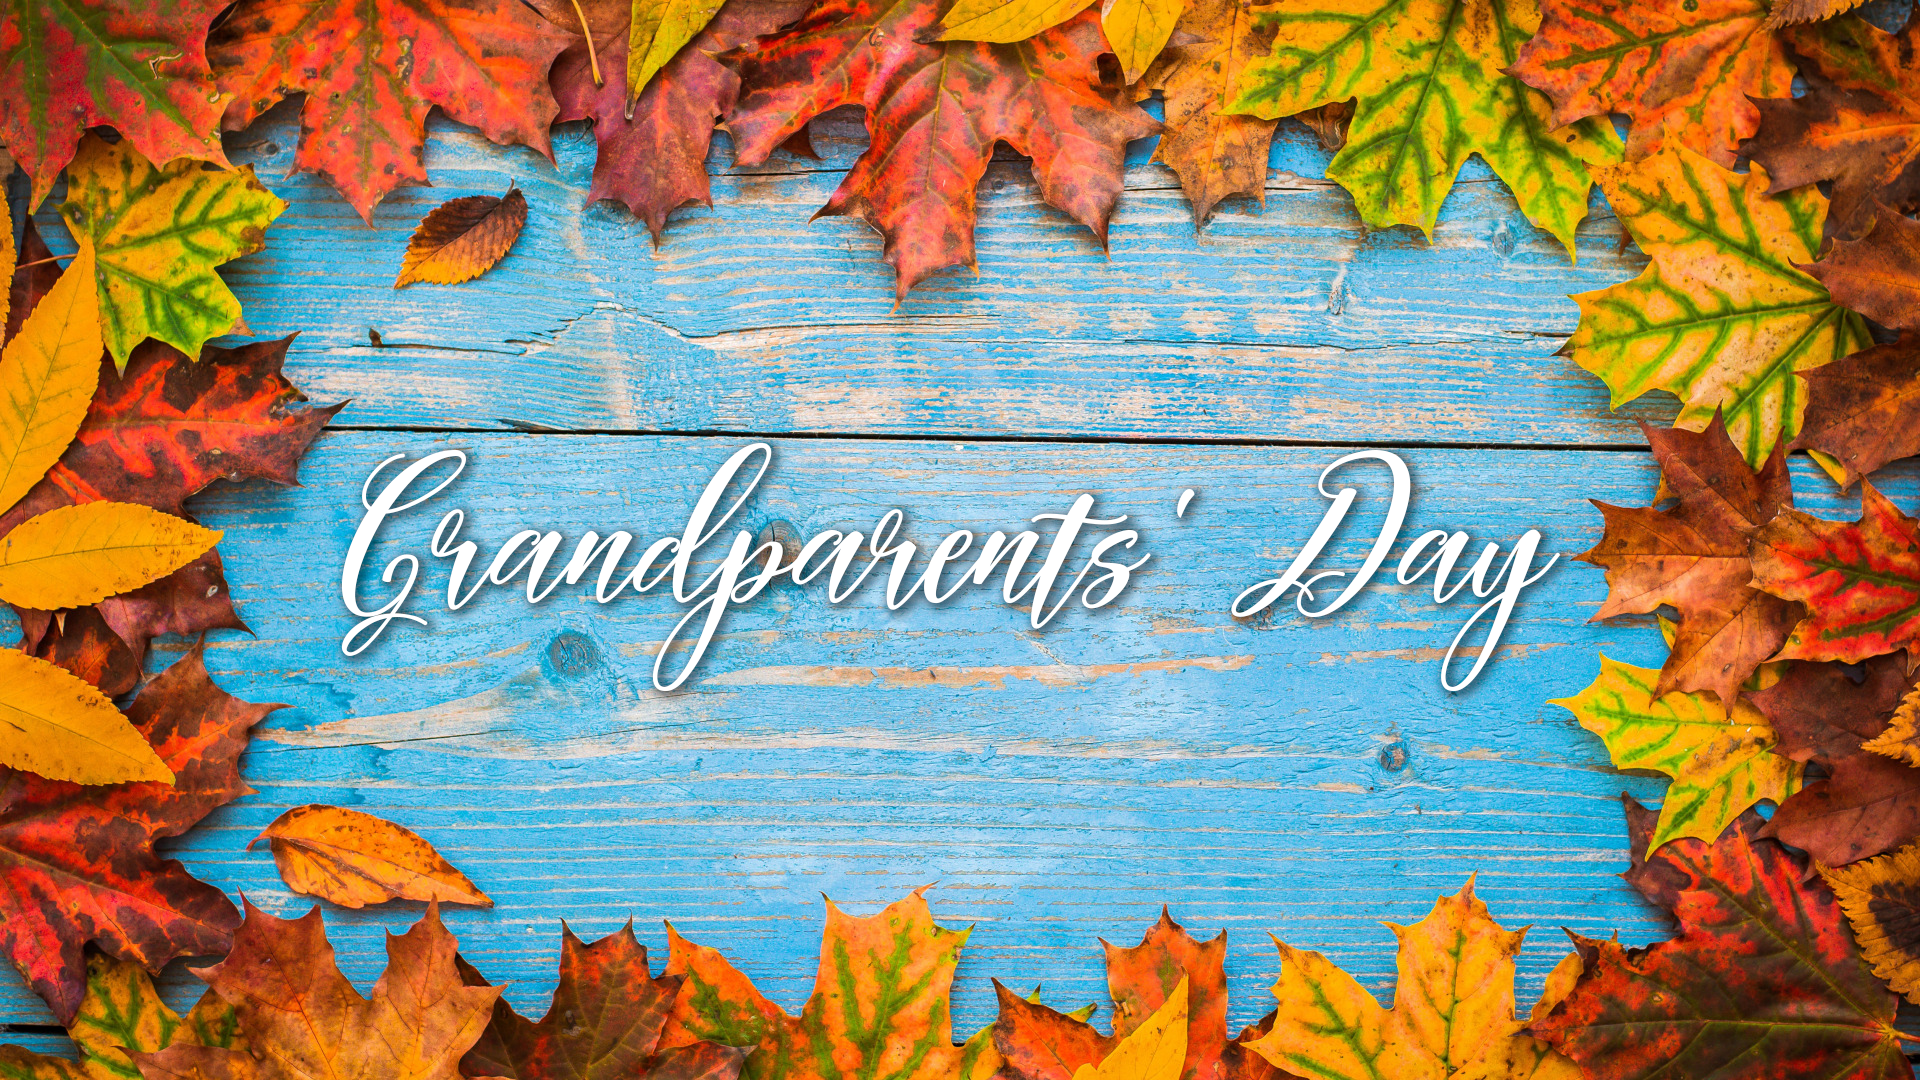 WCA – Grandparents Day, October 20th